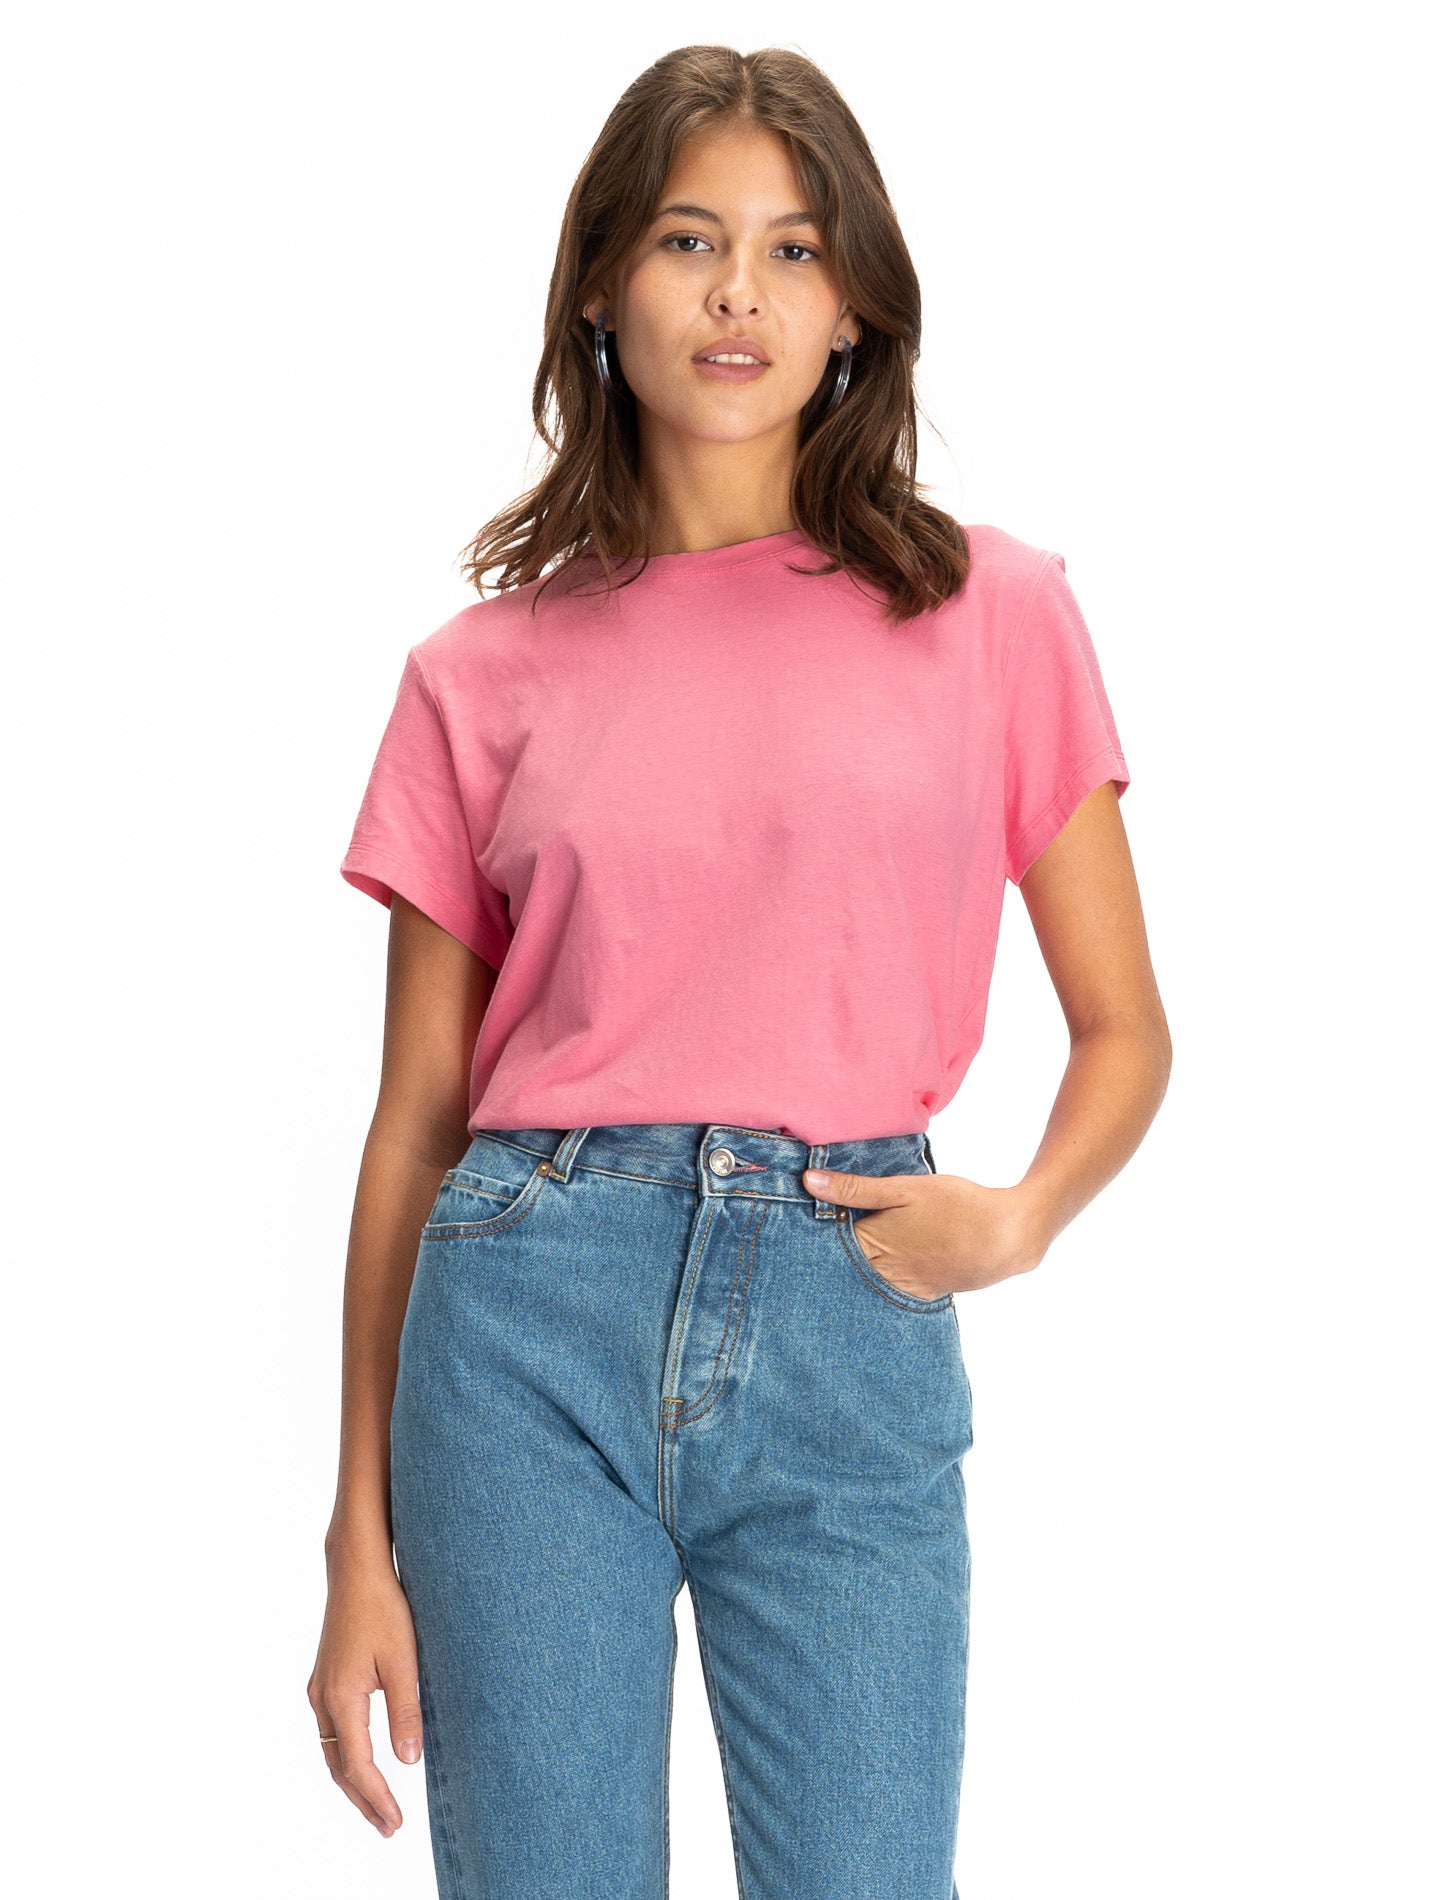 Le tee-shirt Iconic Willie® jersey bio-recyclé Rose intense